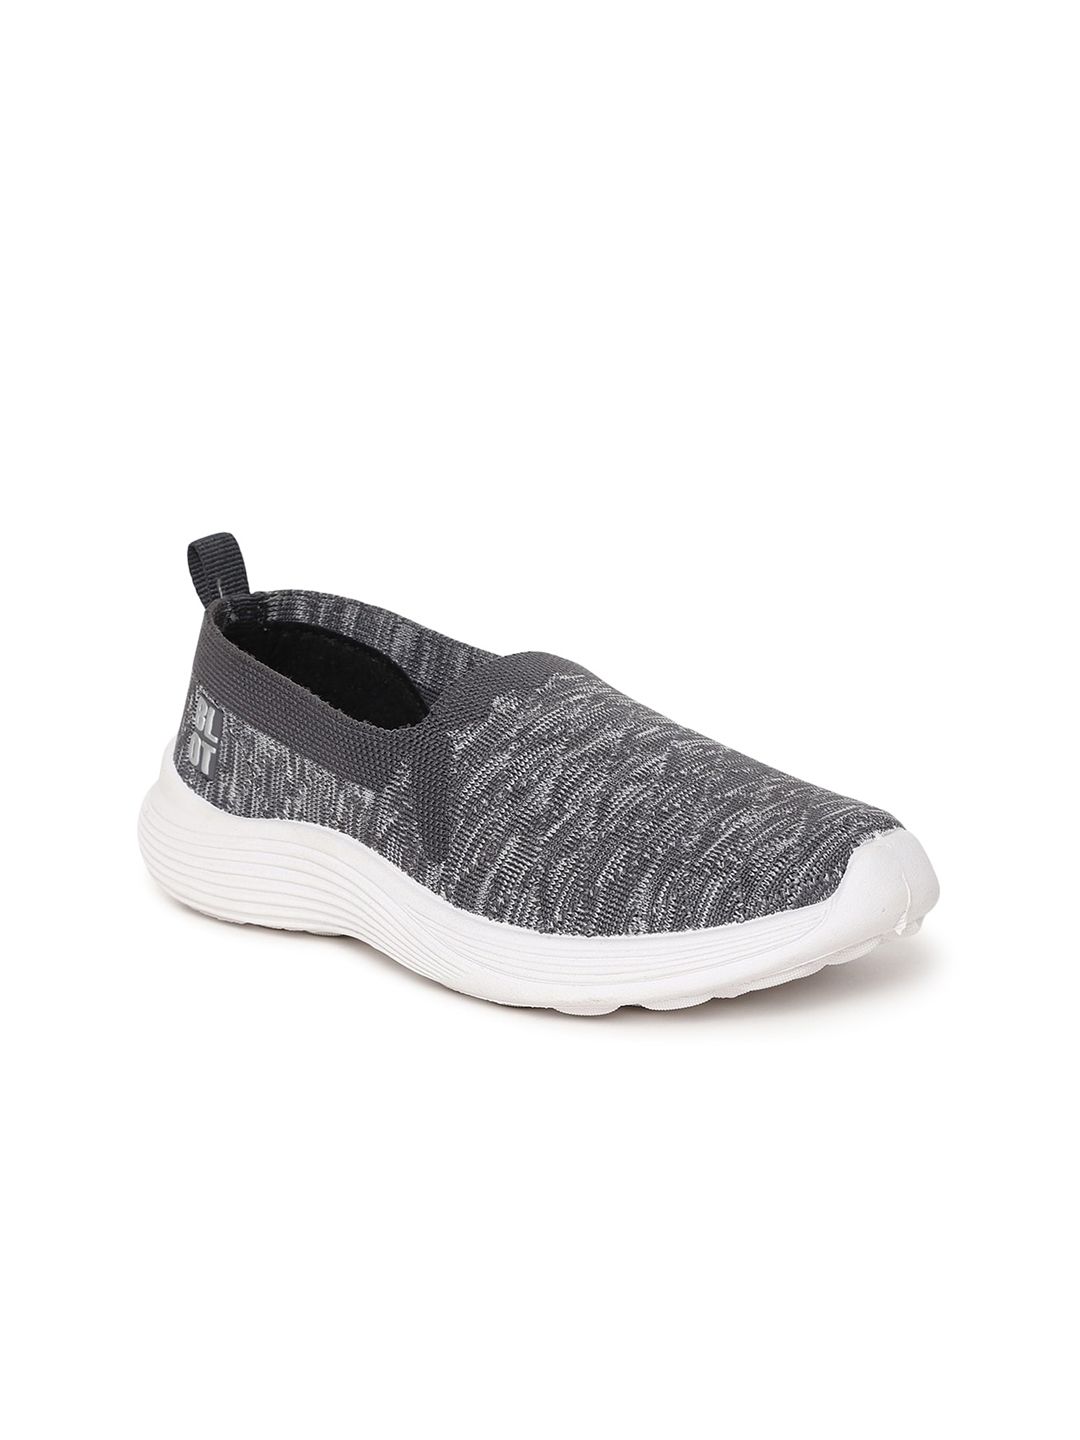 Paragon Women Woven Design Slip-On Sneakers Price in India